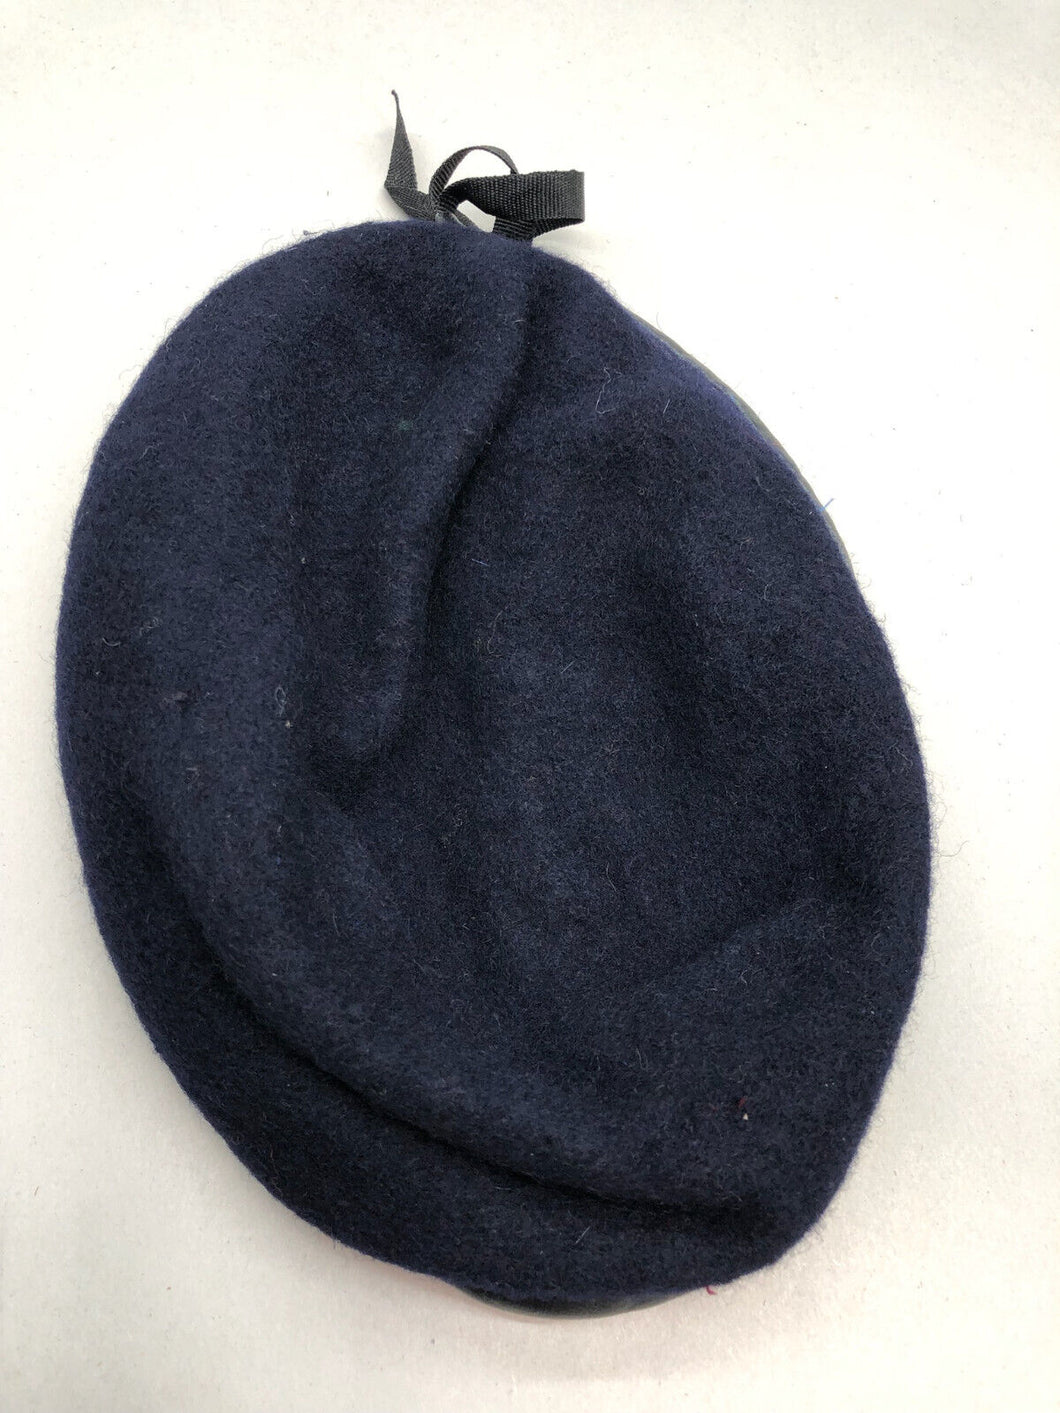 Genuine British Army Military Soldiers Beret Hat - Navy Blue - Size 62cm